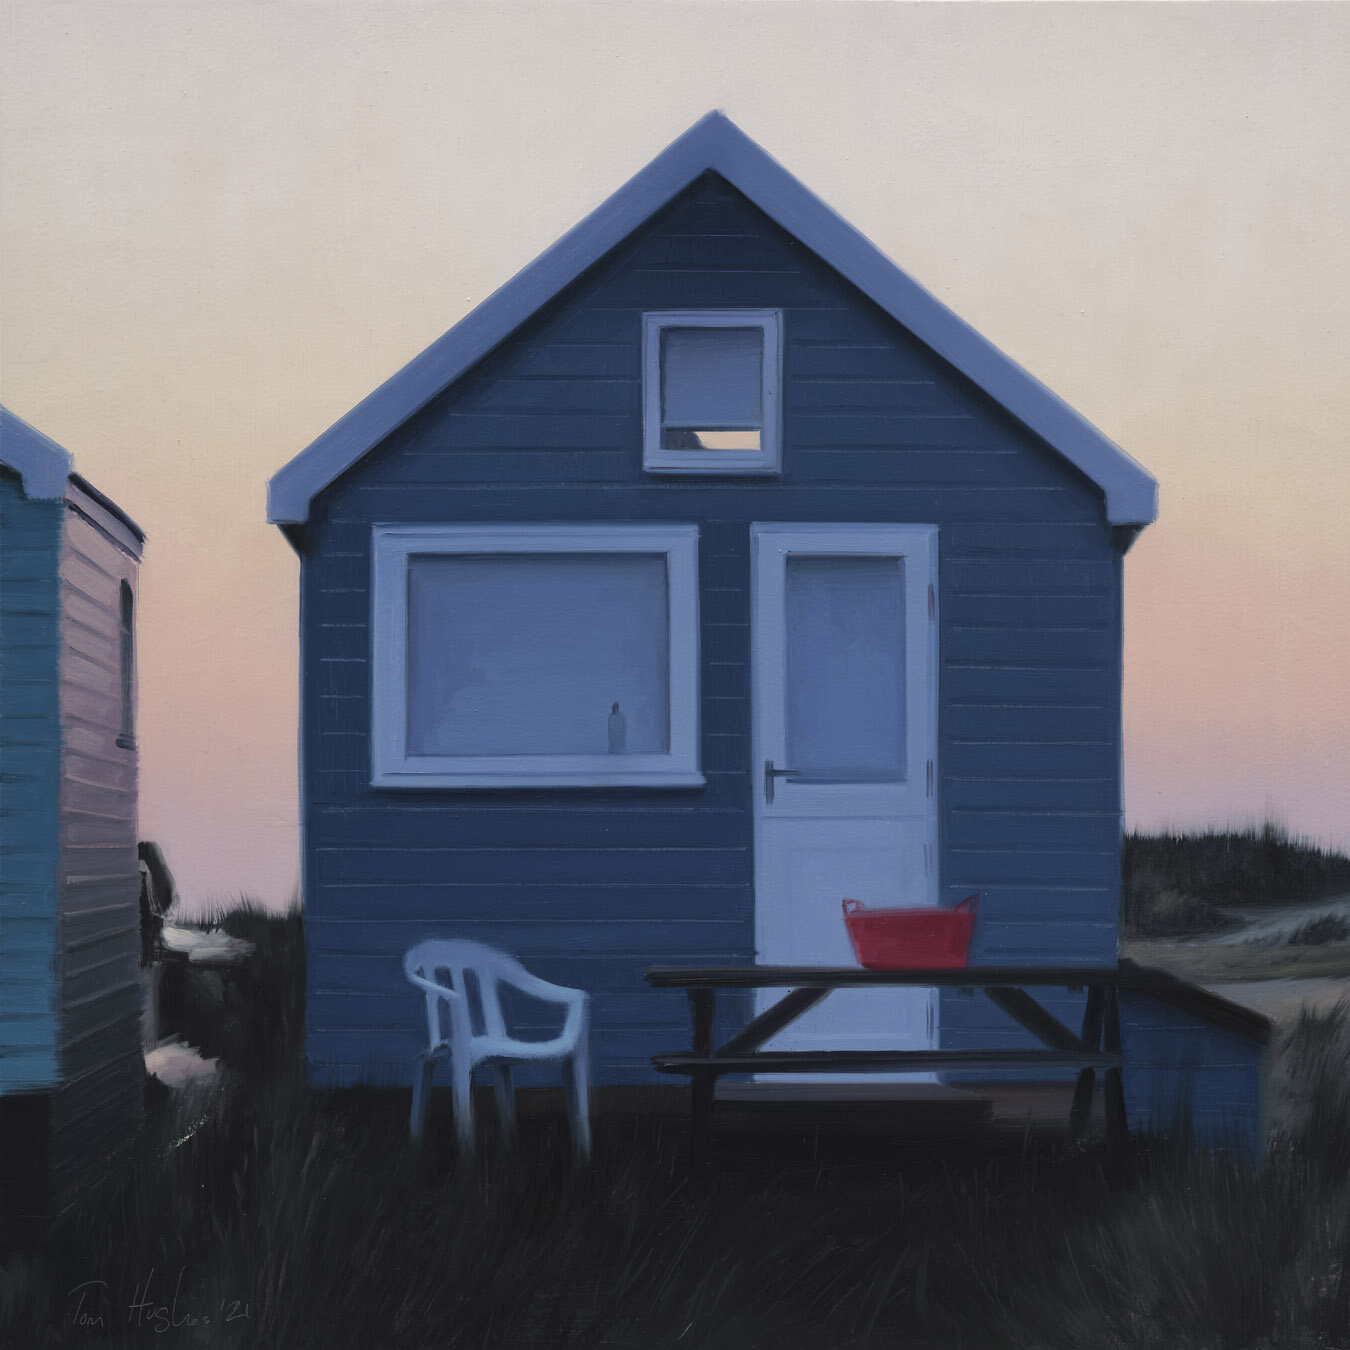 Back-lit blue hut with red tub